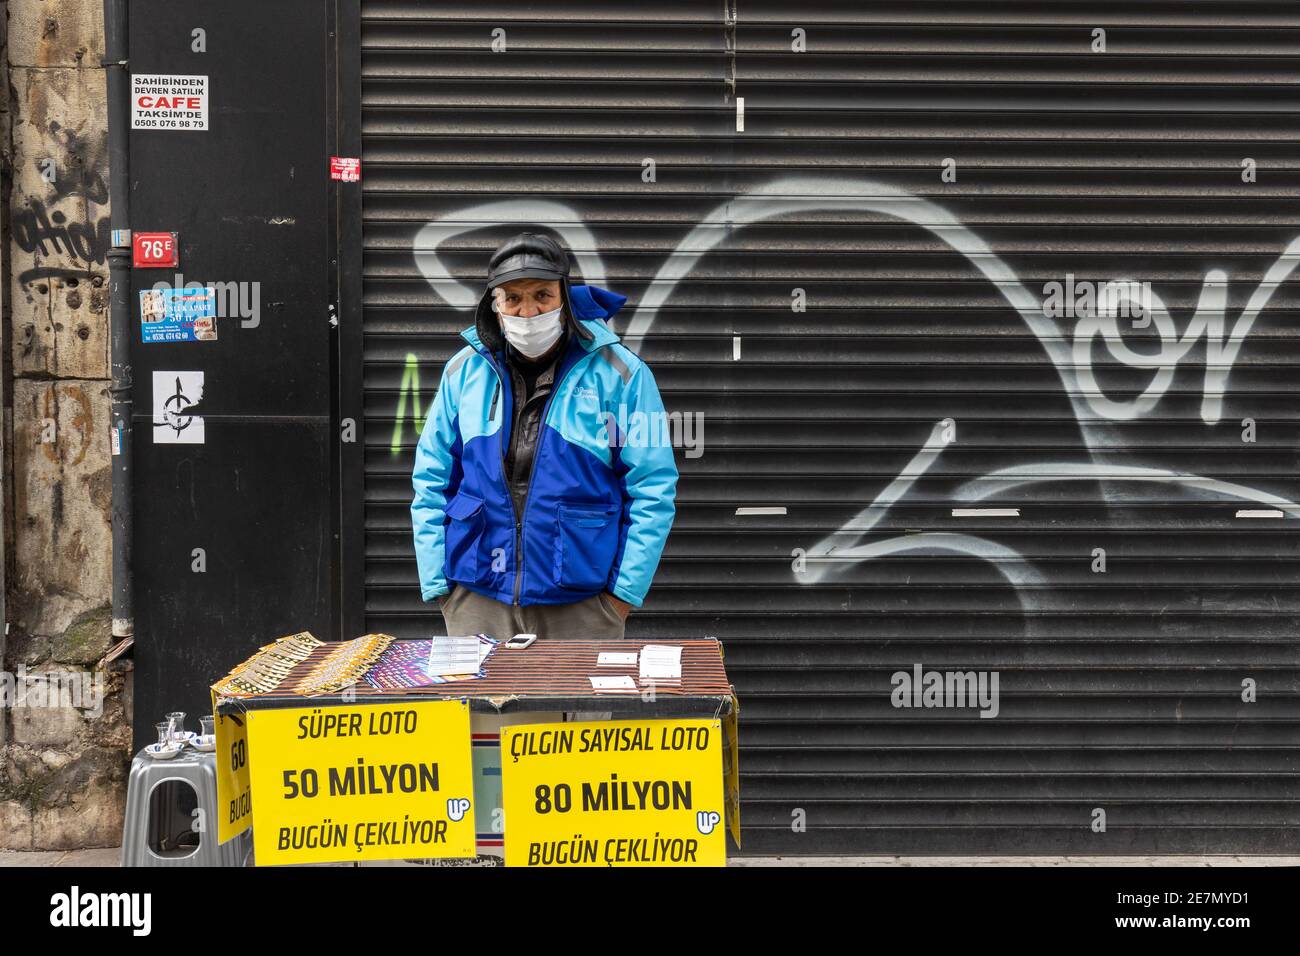 Istanbul, Turkey - Jan. 29, 2021: Man wearing a protective face mask sells lottery ticket in famous Istiklal street in Istanbul. Stock Photo